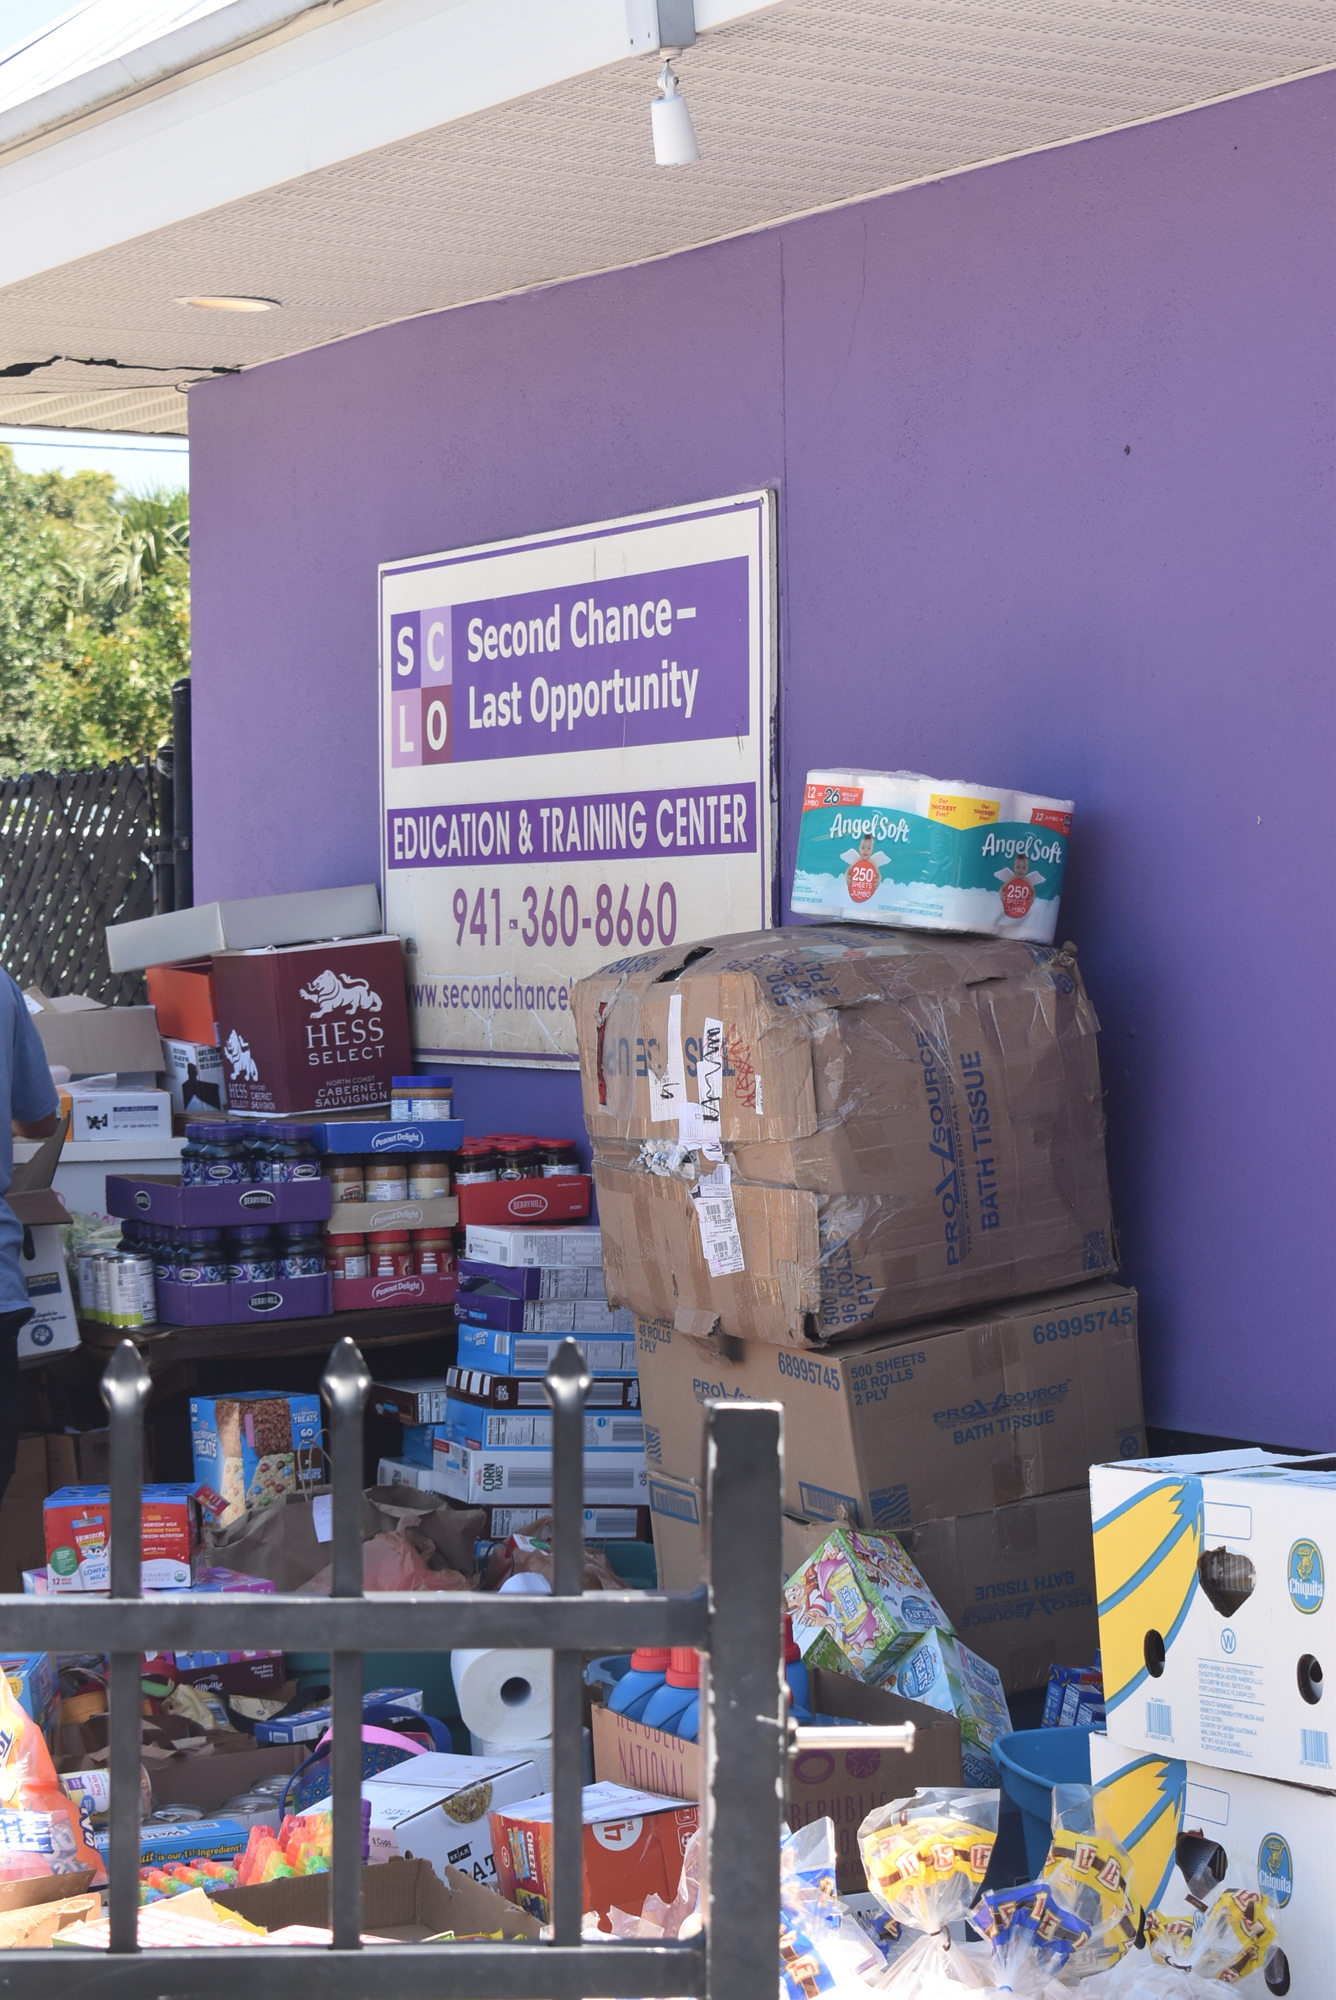 Piles of food and other home supplies go out to Second Chance Last Opportunity.